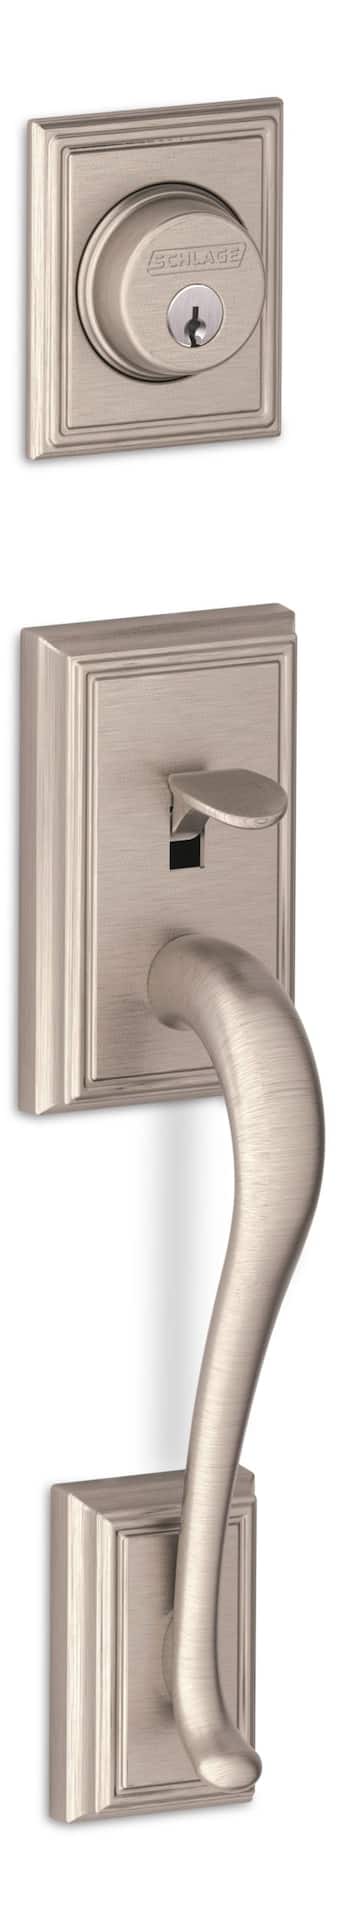 Schlage Addison Satin Nickel Single-Cylinder Deadbolt Keyed Entry Door  Handleset with Accent Lever in the Handlesets department at